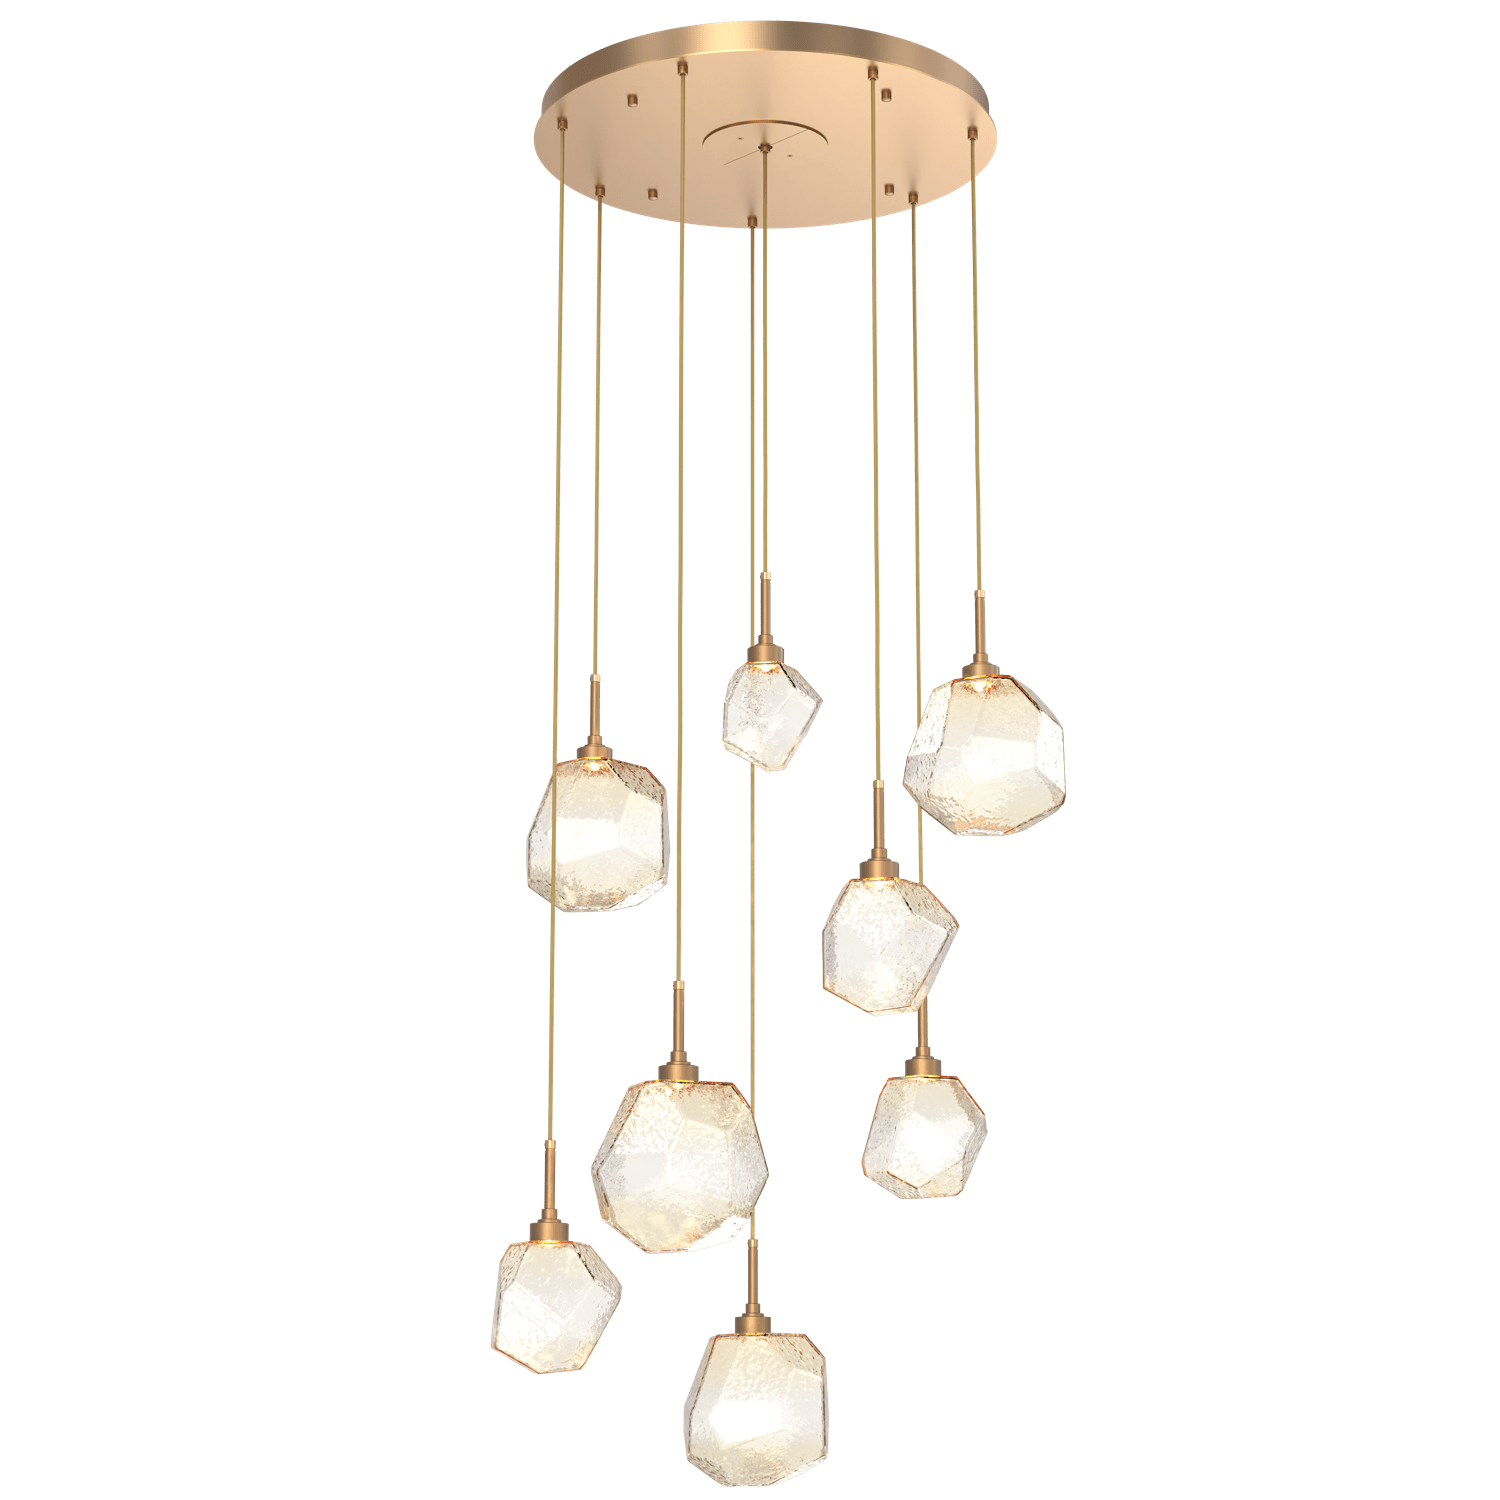 CHB0039-08-NB-A-Hammerton-Studio-Gem-8-light-round-pendant-chandelier-with-novel-brass-finish-and-amber-blown-glass-shades-and-LED-lamping